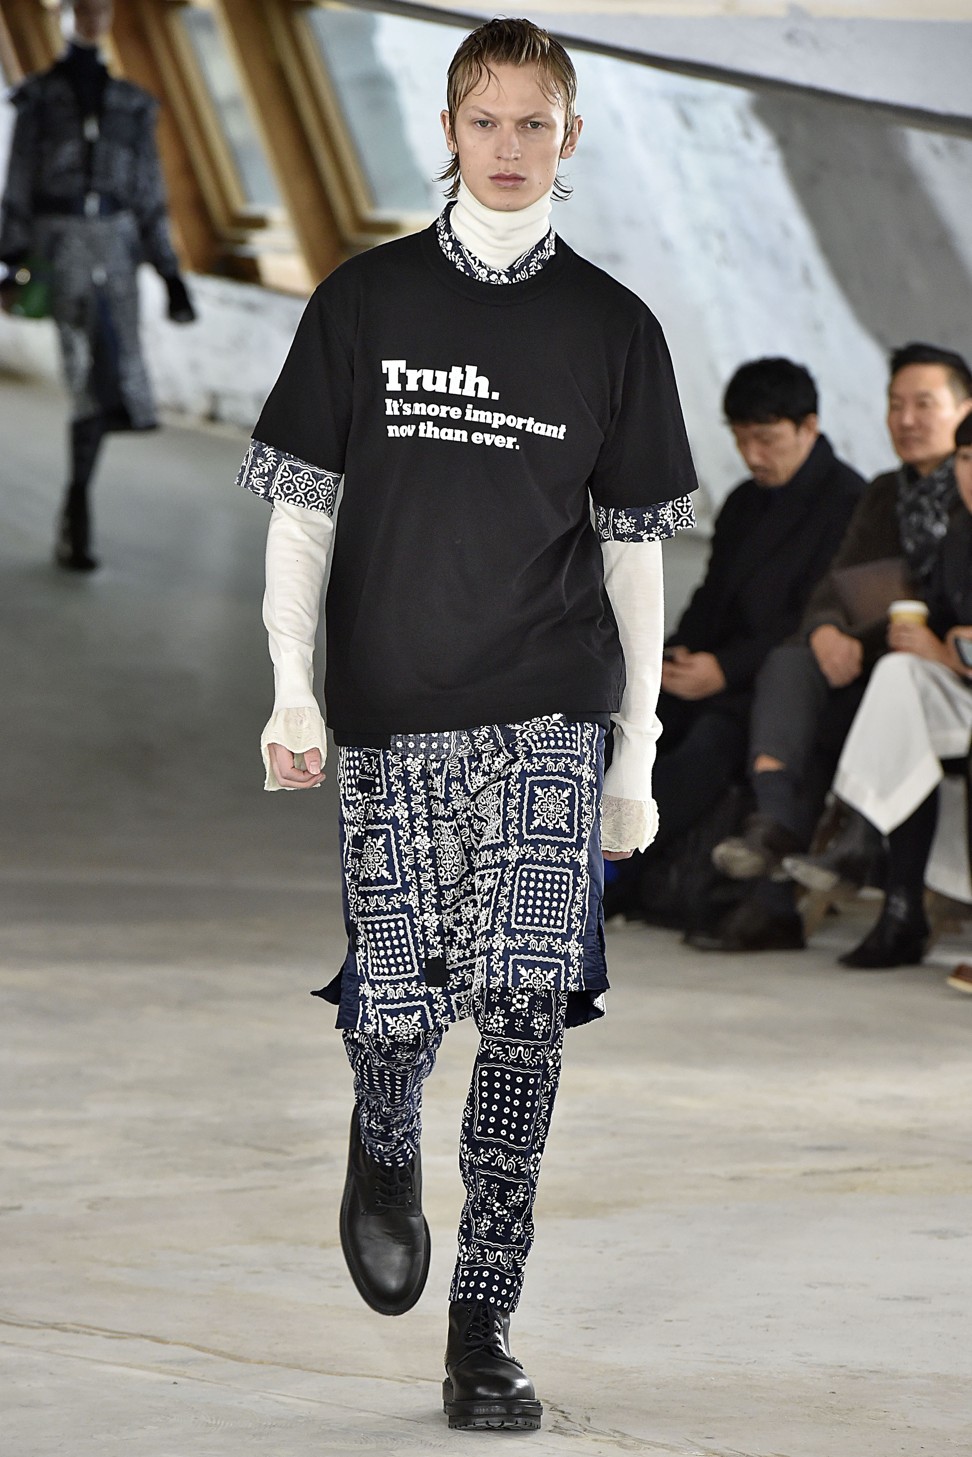 A look featuring a slogan from The New York Times ‘Truth’ campaign at Sacai Paris Fashion Week.